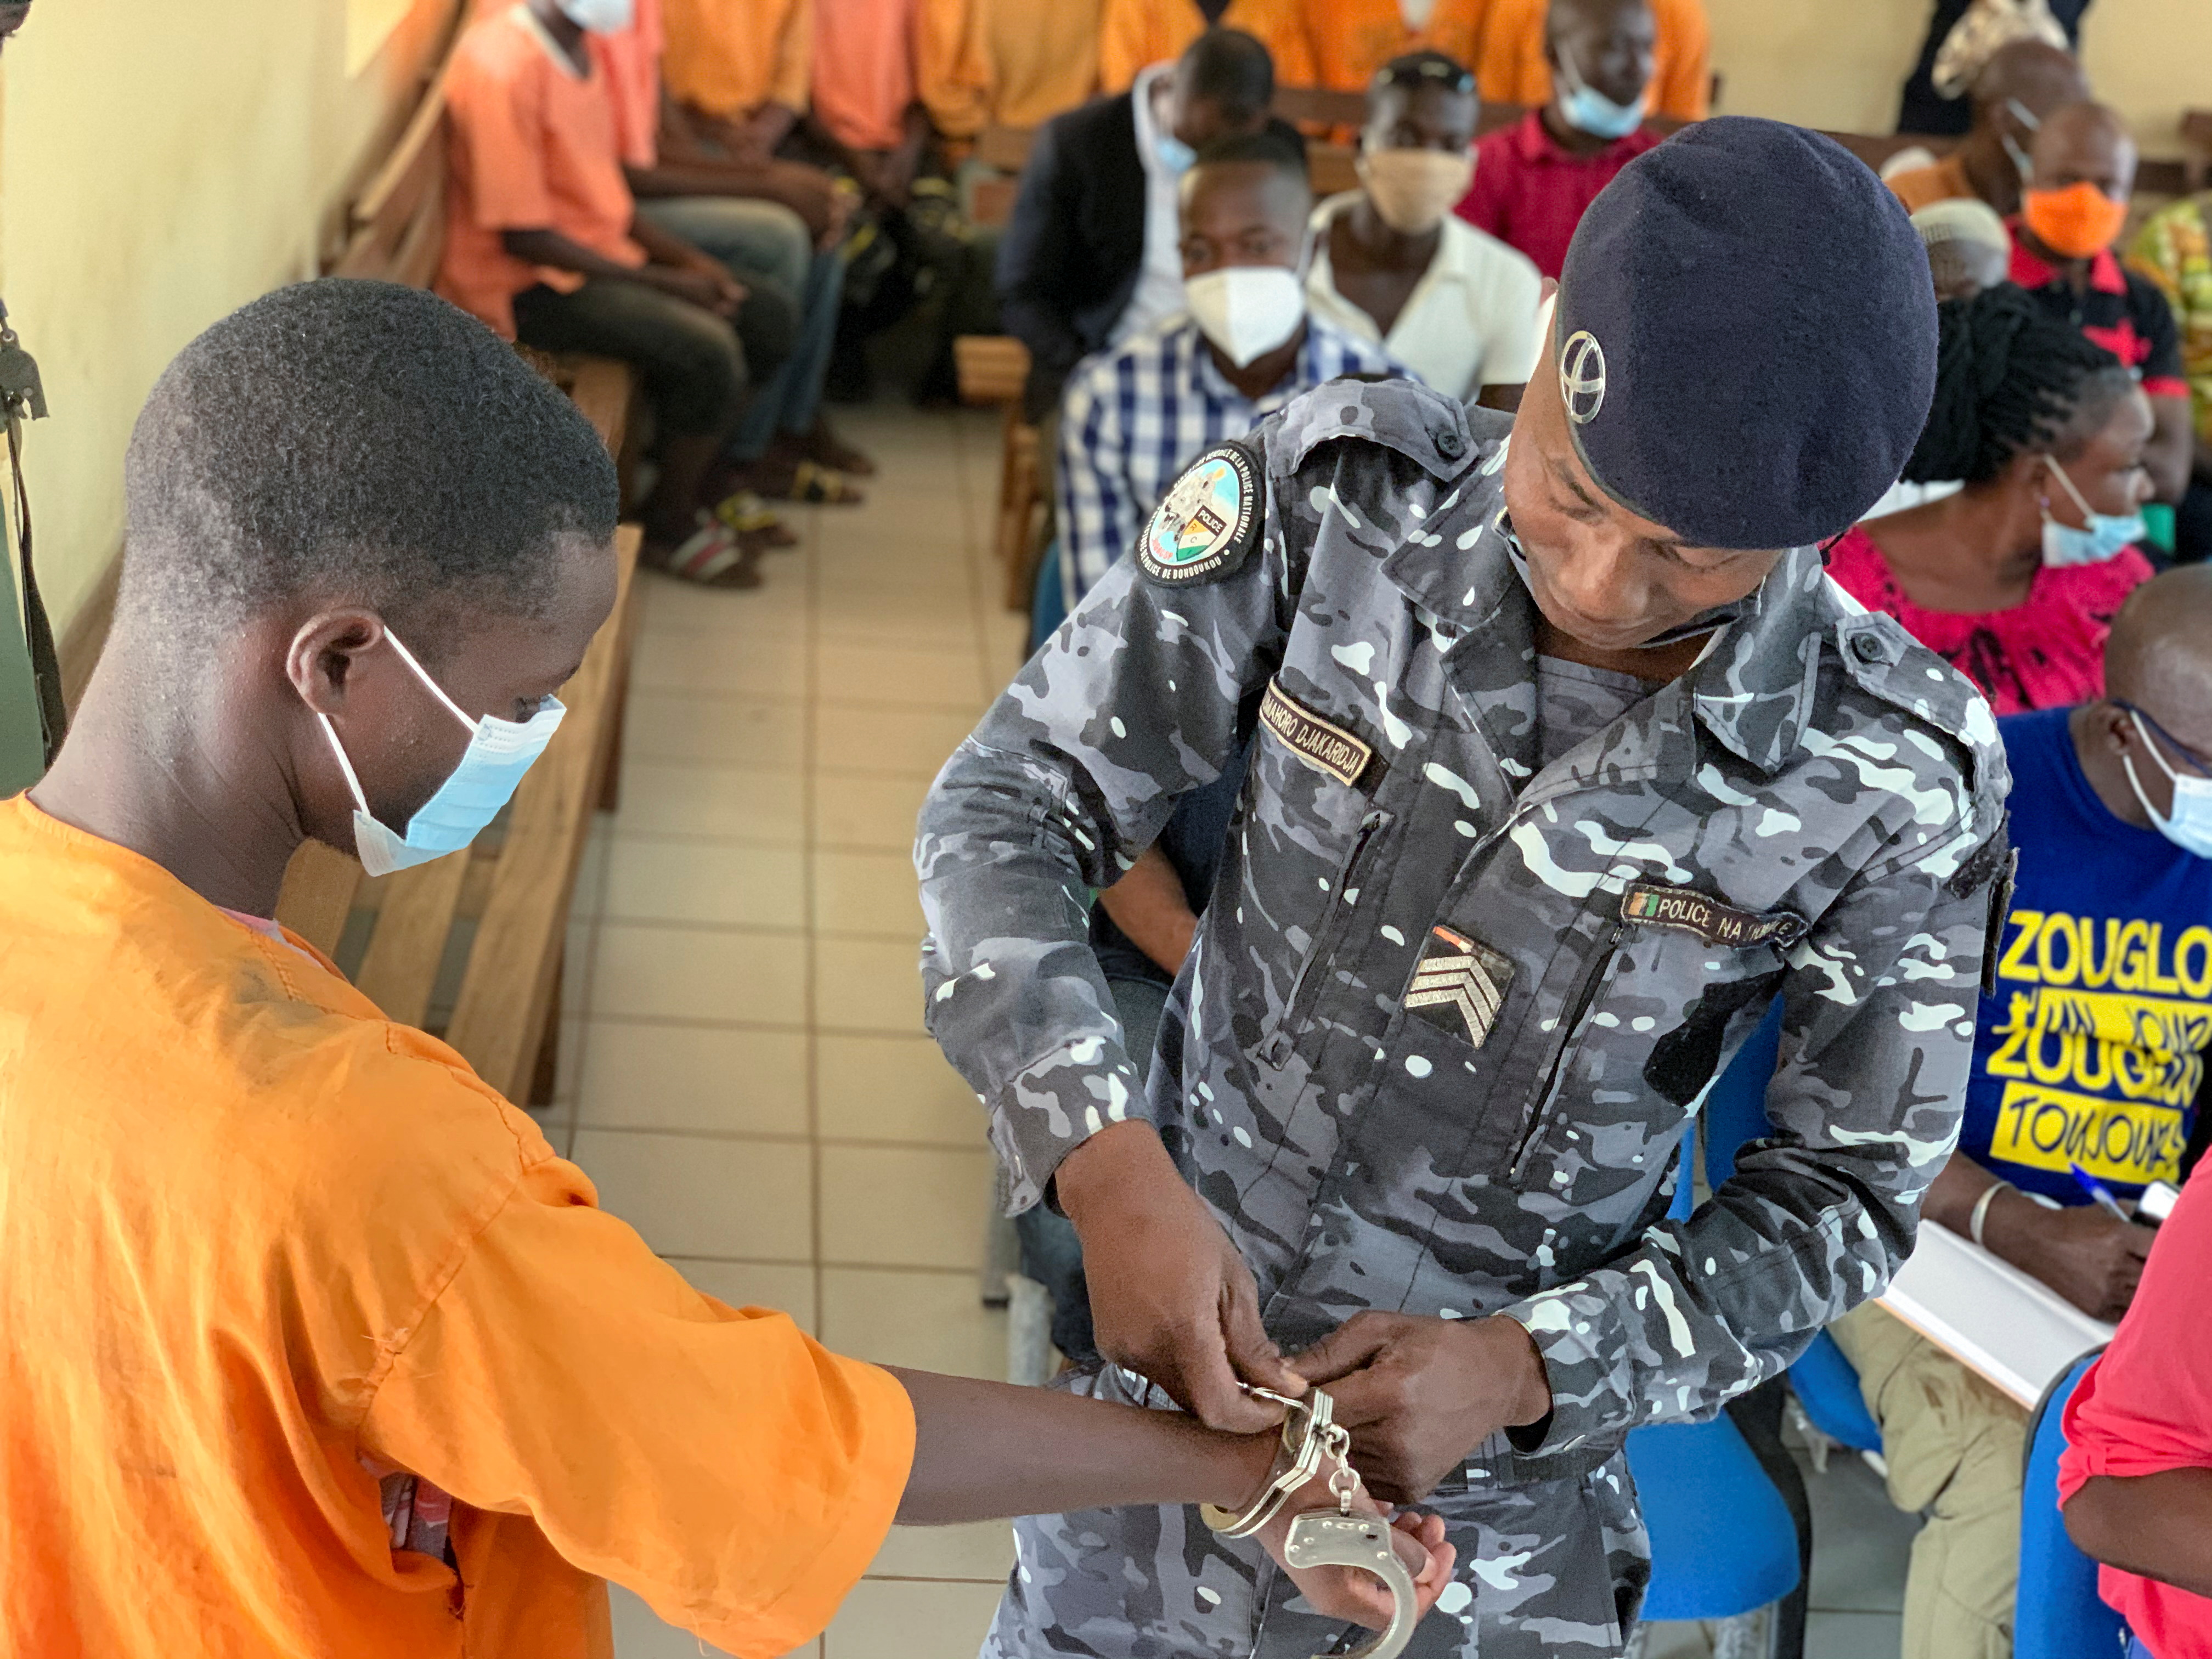 A police officer removes handcuffs from a man accused of child trafficking at a court in Bouna